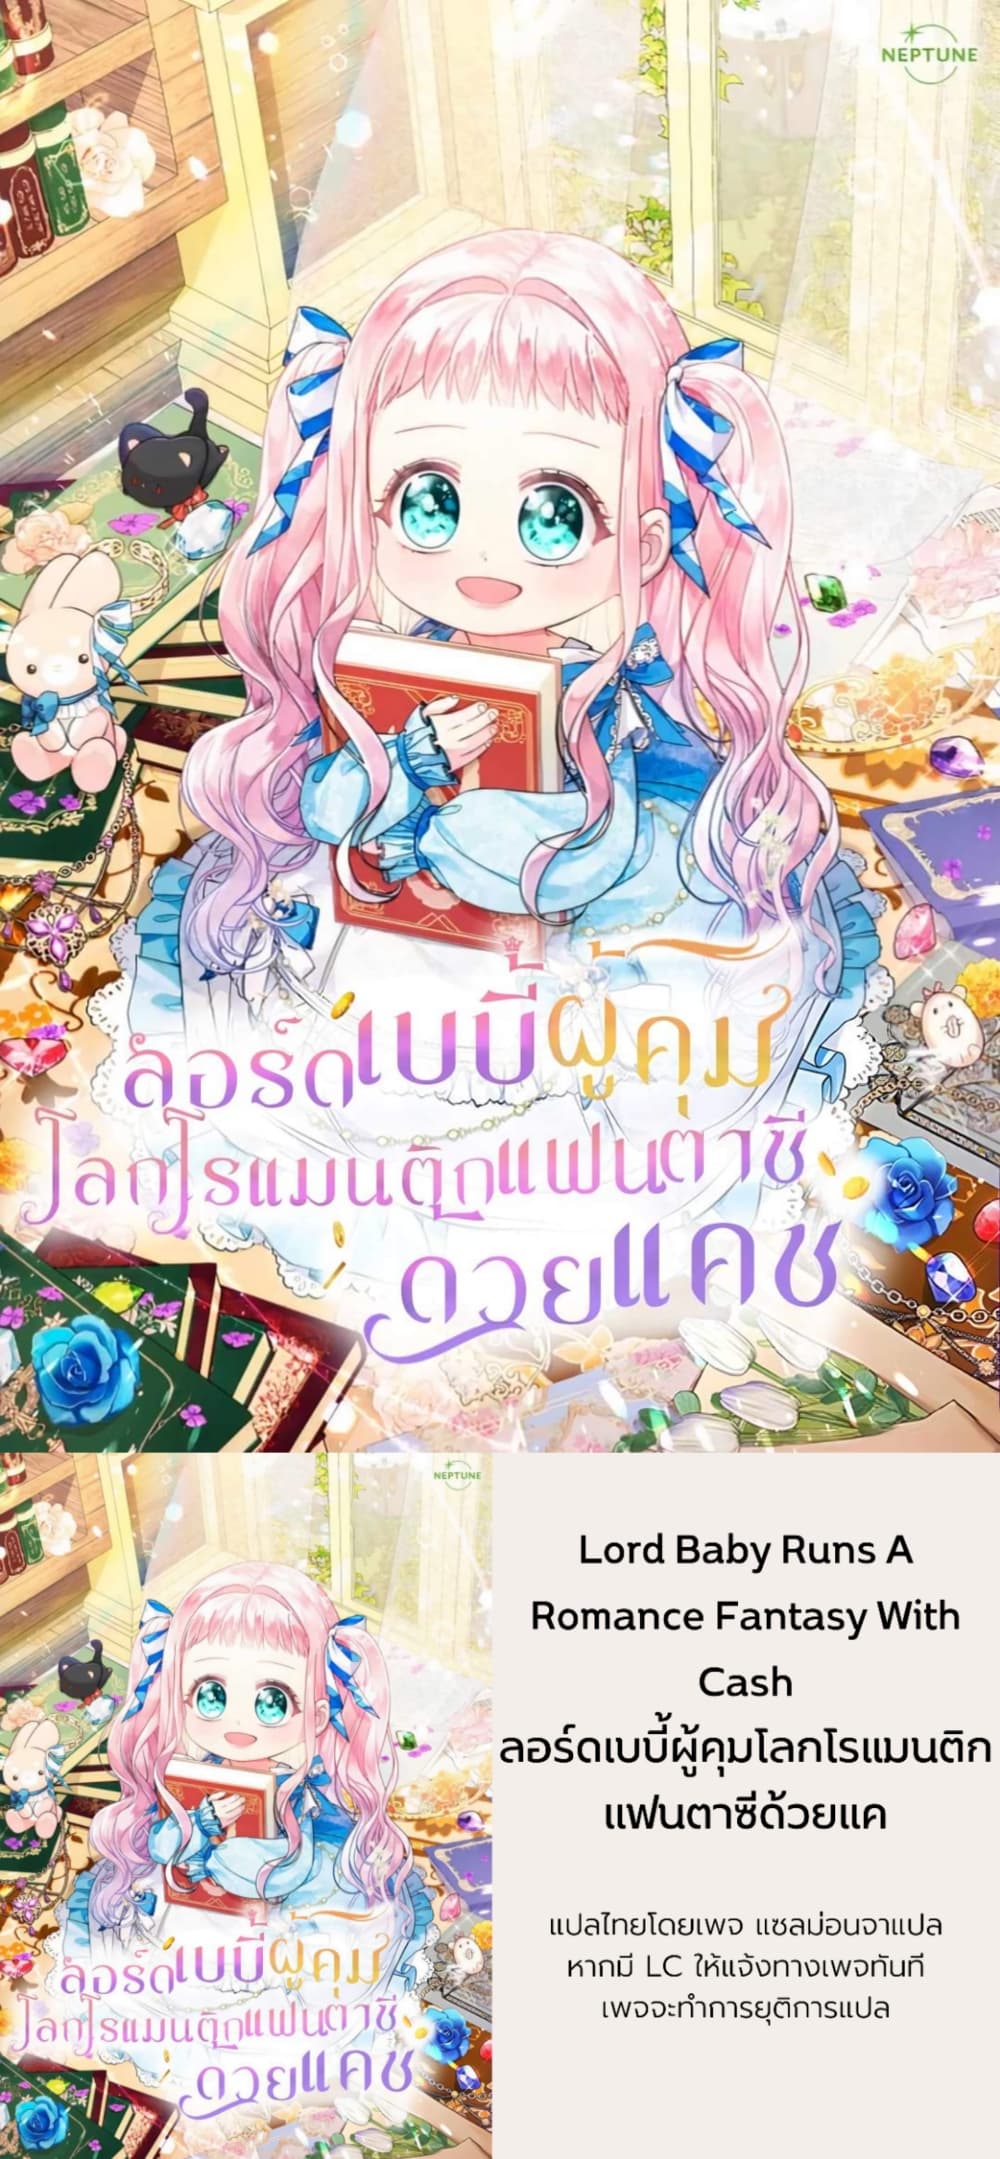 Lord Baby Runs a Romance Fantasy With Cash 4-4